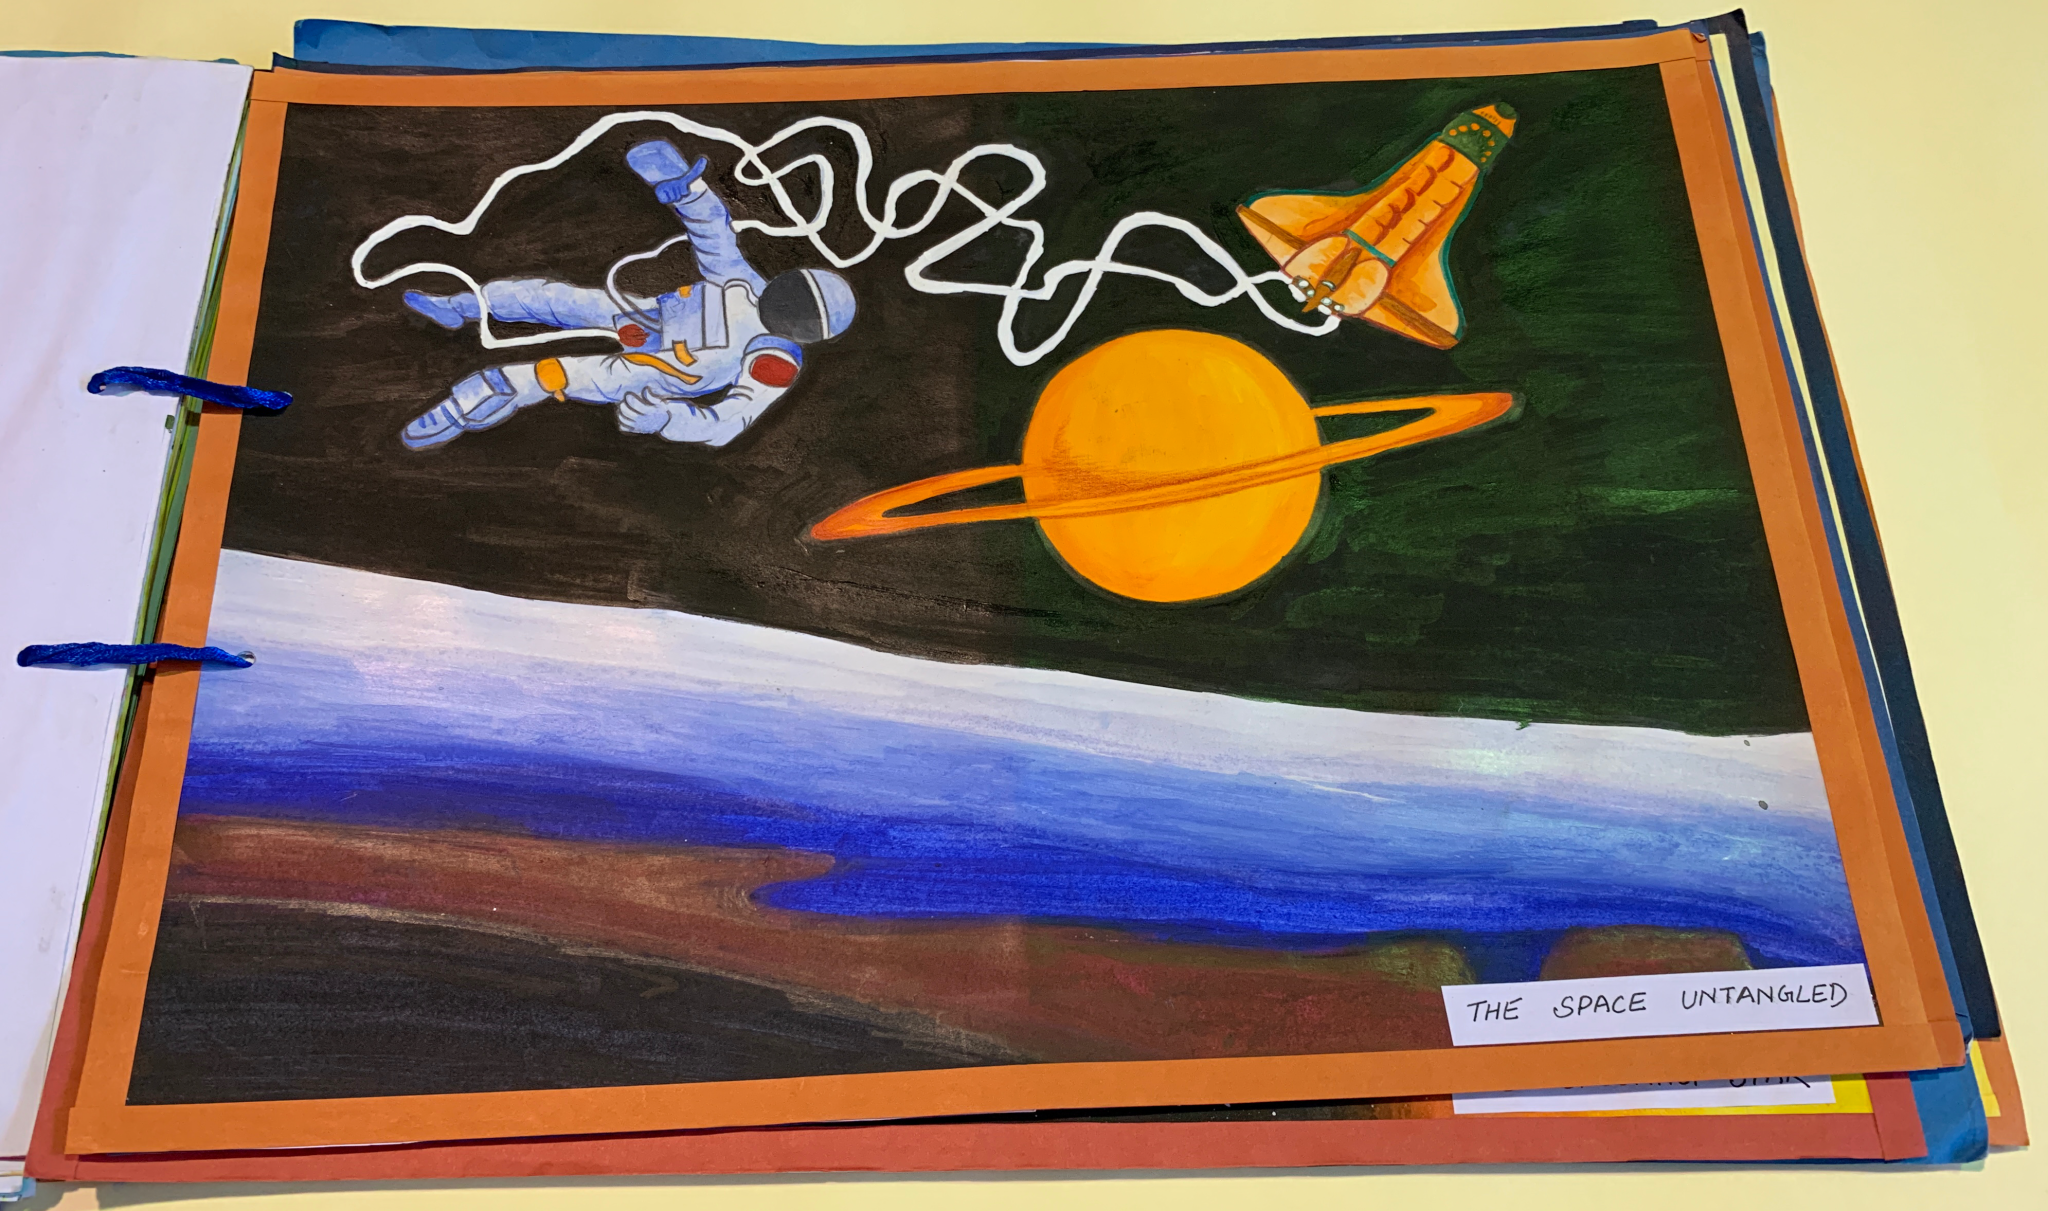 Photograph of a student's painting of a space settlement design from the Ames Research Center Archives.